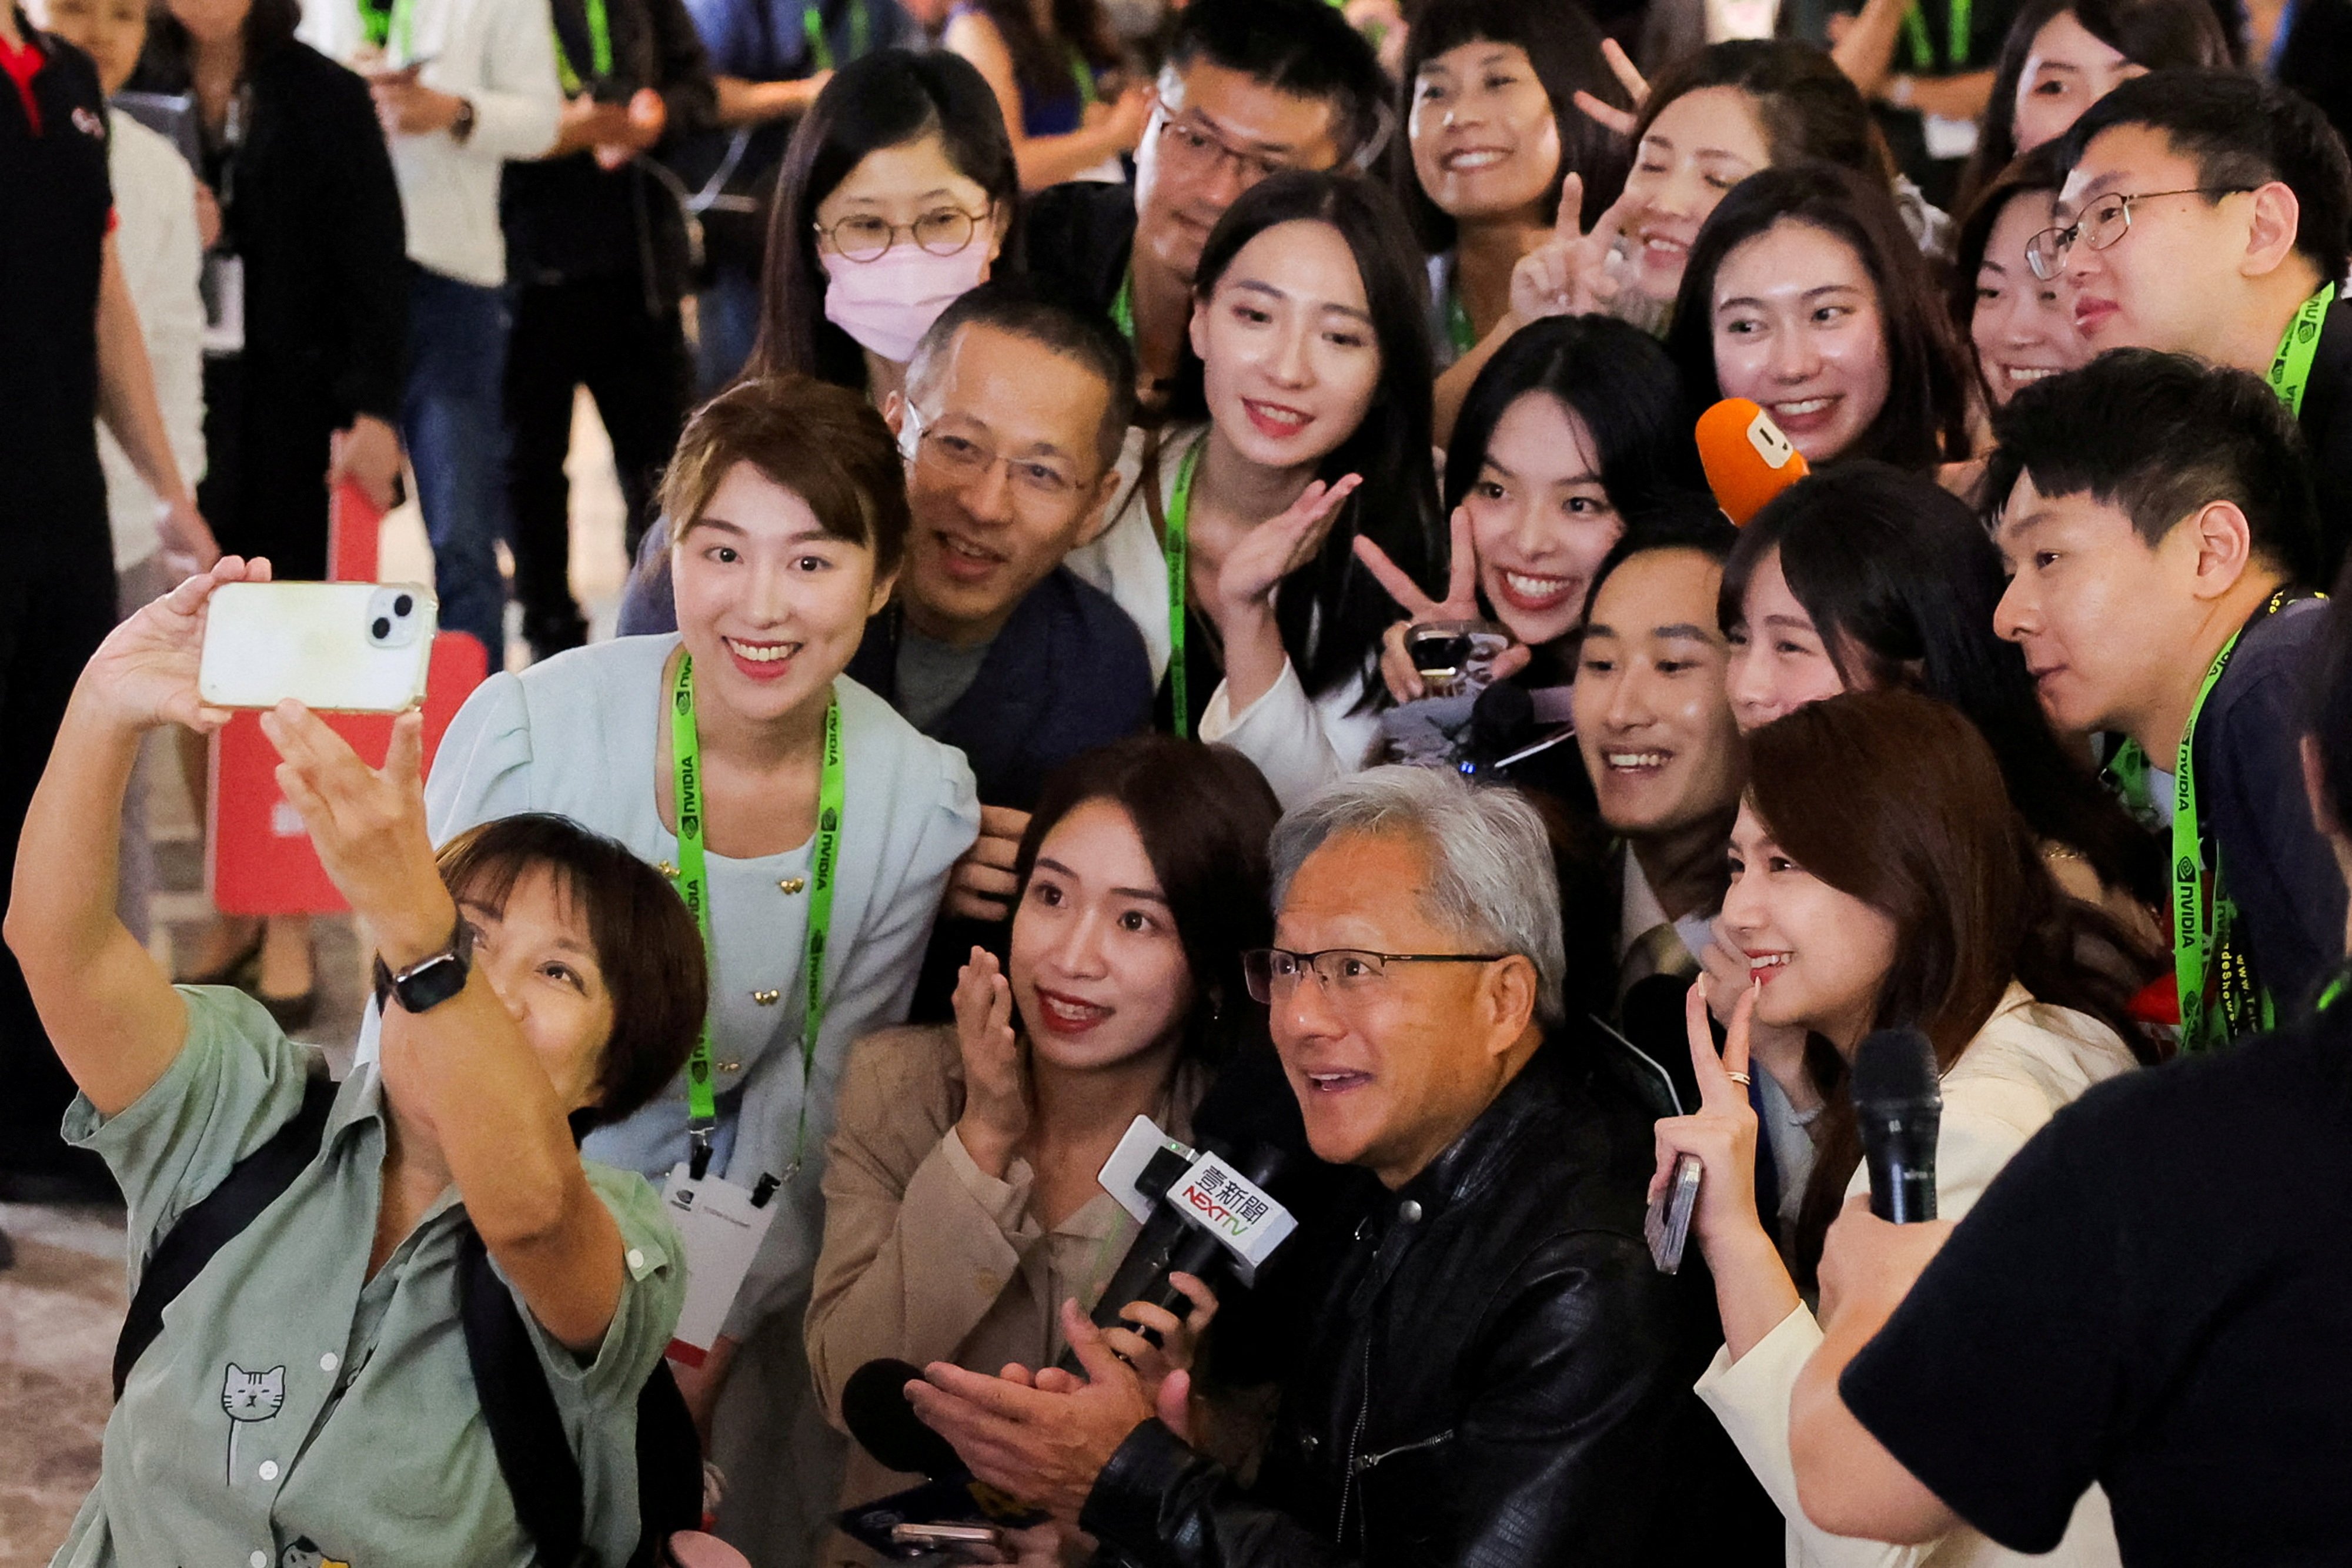 Nvidia CEO Jensen Huang poses for a selfie with members of the media at the Computex Taipei trade show in Taiwan on Tuesday. Photo: Reuters